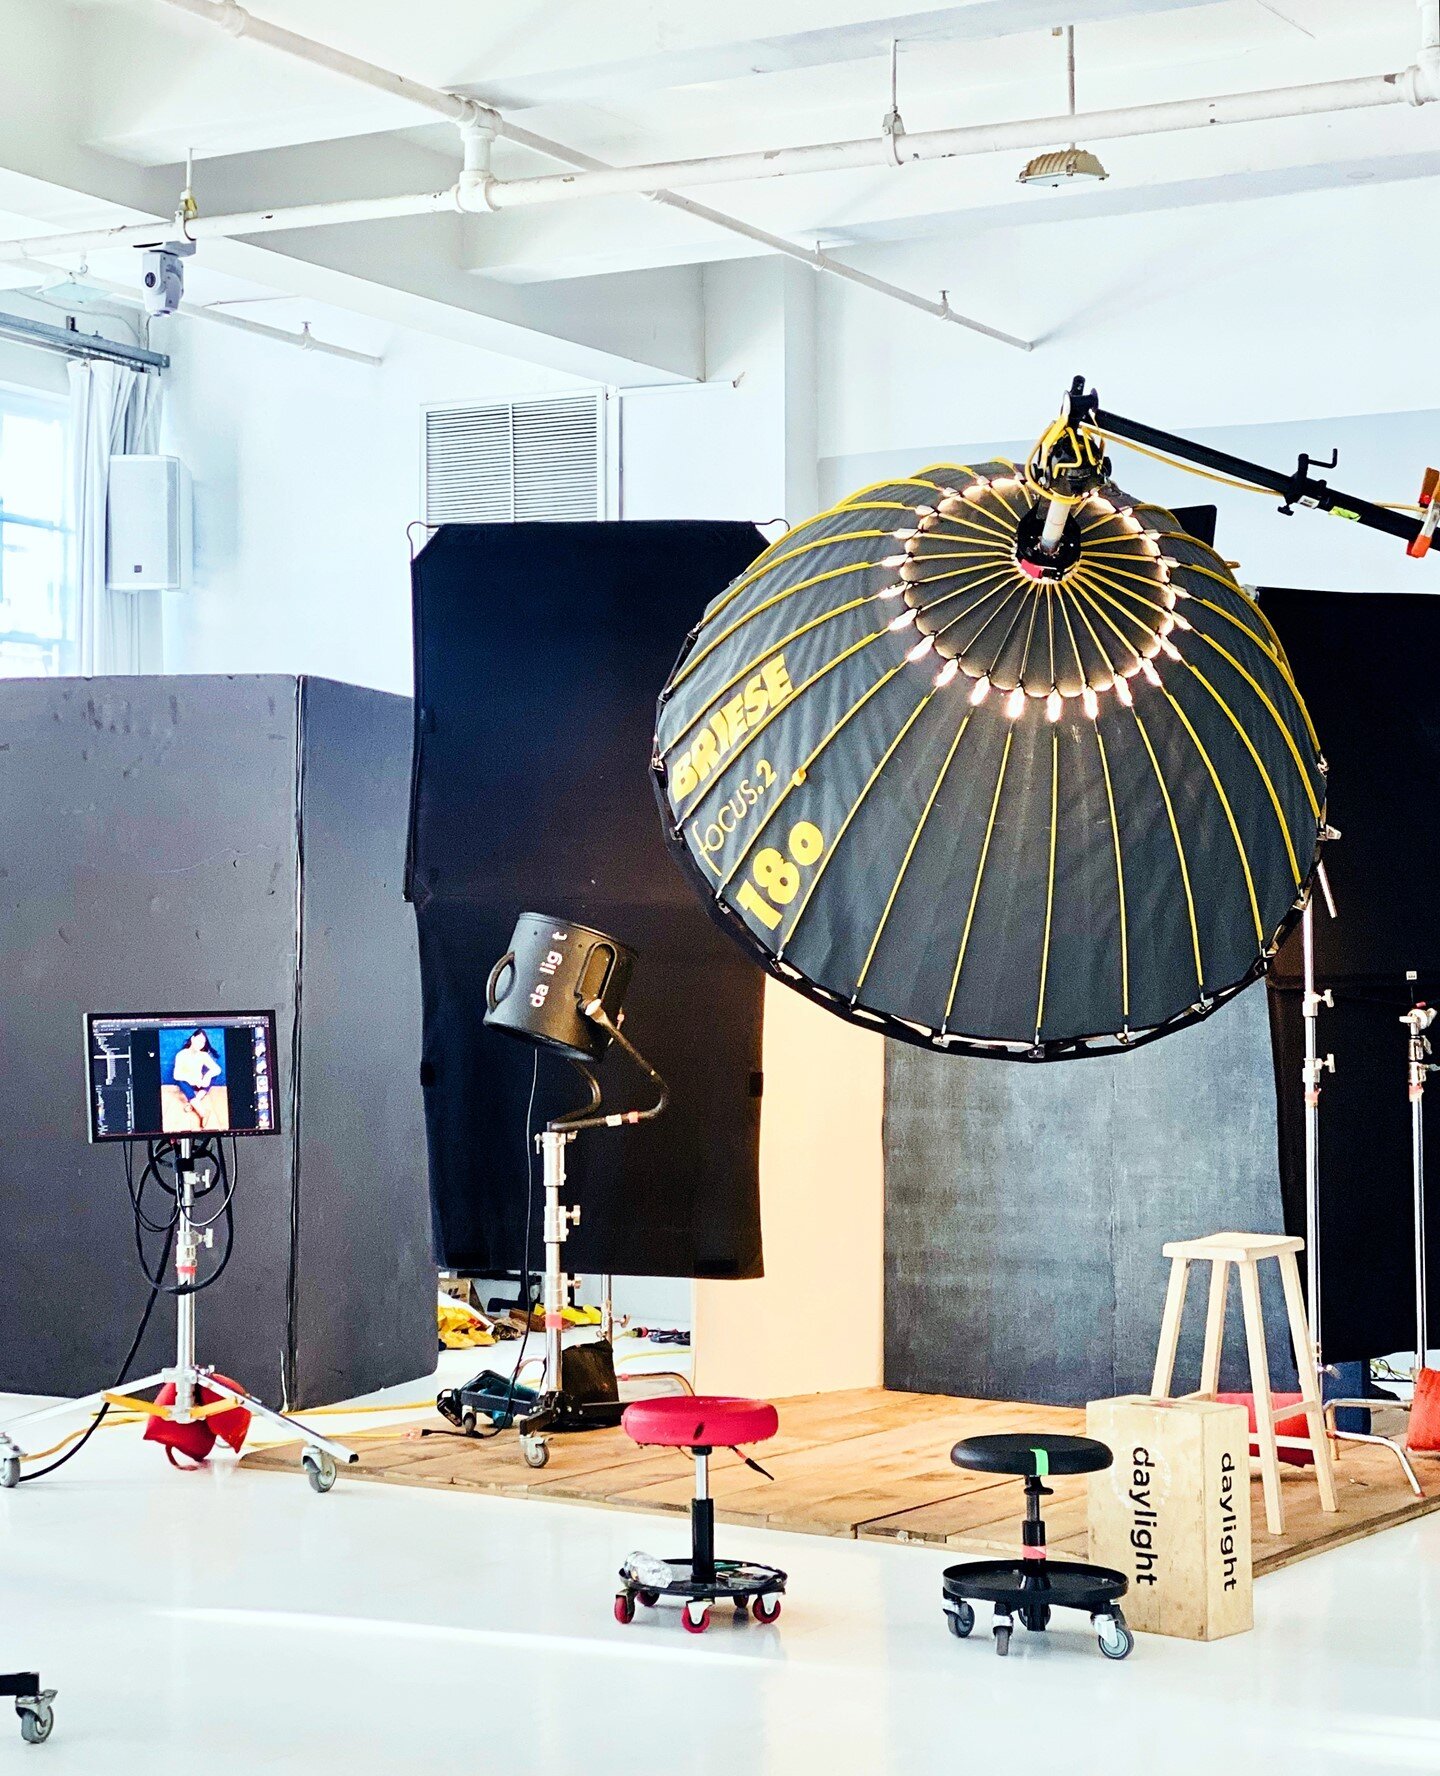 Fully focused, Briese focus 180 creates dramatic lighting with multiple screen differences between the center and the edge of the picture. It's perfect for strong accentuation.⁠
.⁠
.⁠
.⁠
#shotatdaylight #daylightstudio #photostudio #nycphotostudio #p